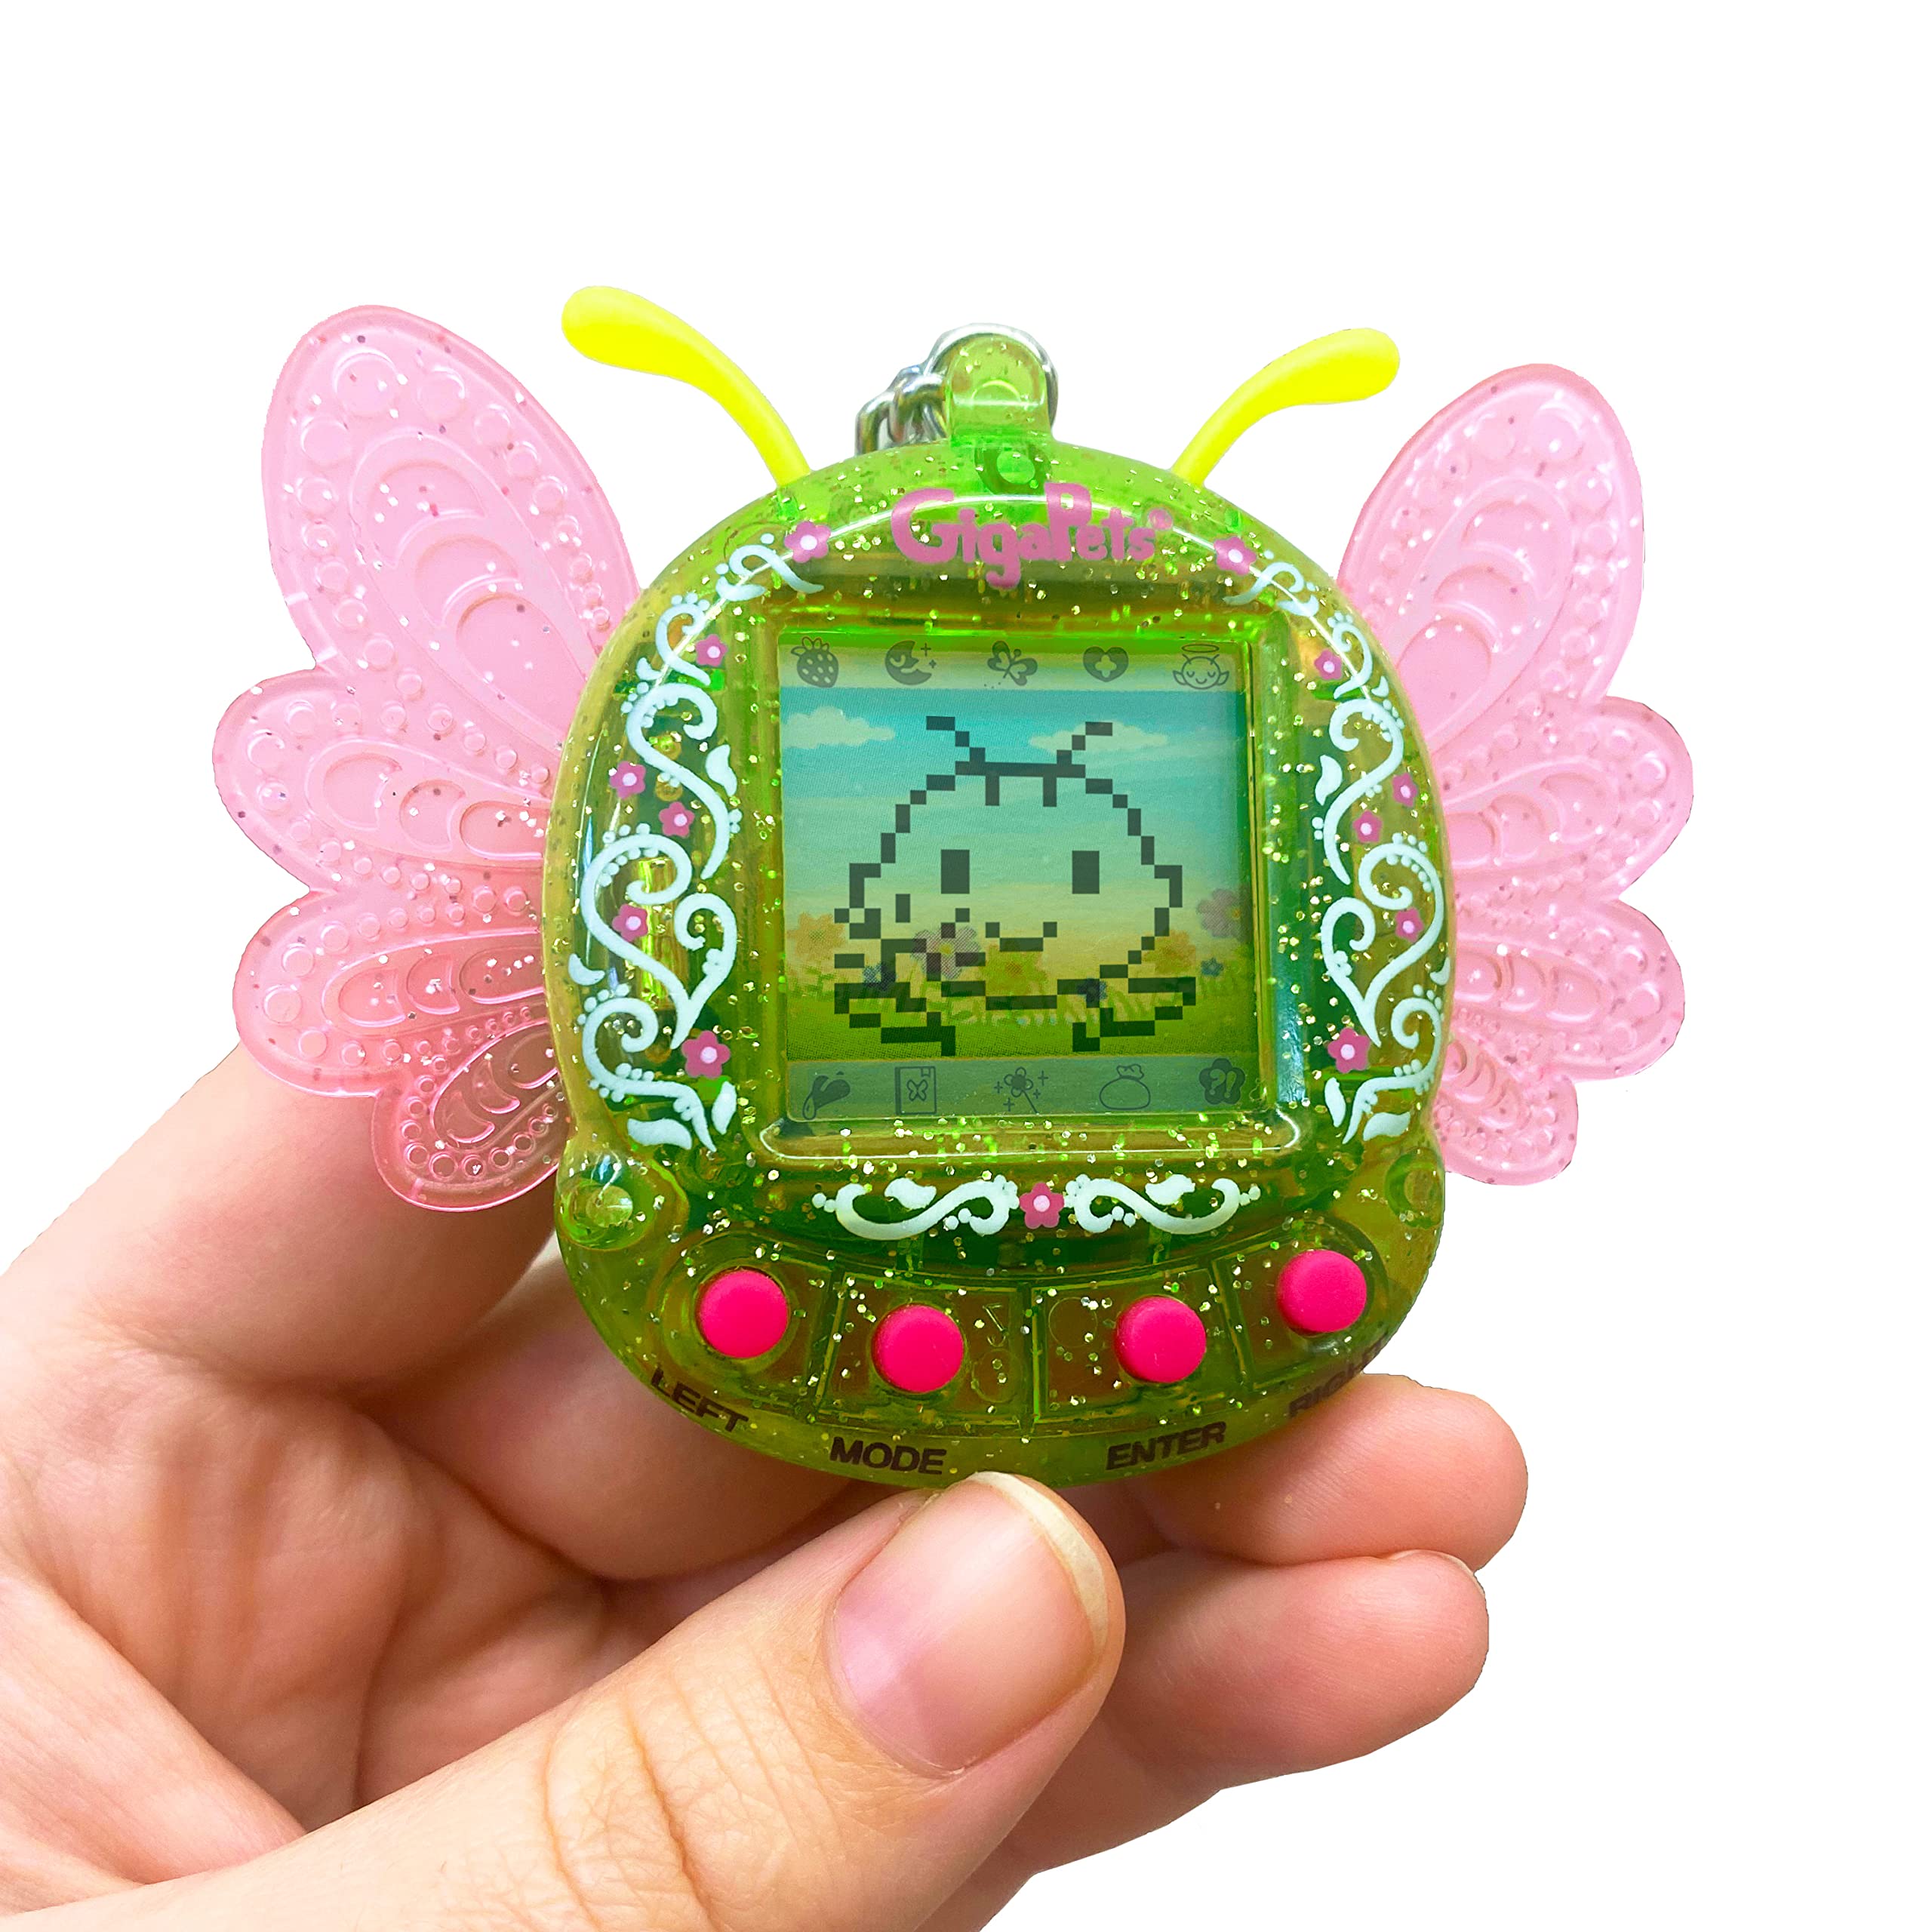 Giga Pets Pixie Virtual Pet Electronic Toy (Green), Upgraded Nostalgic 90s Toy, 8 Different Pixie Evolutions, Collect Elements, Cast Spells, Craft Potions, for Kids of All Ages